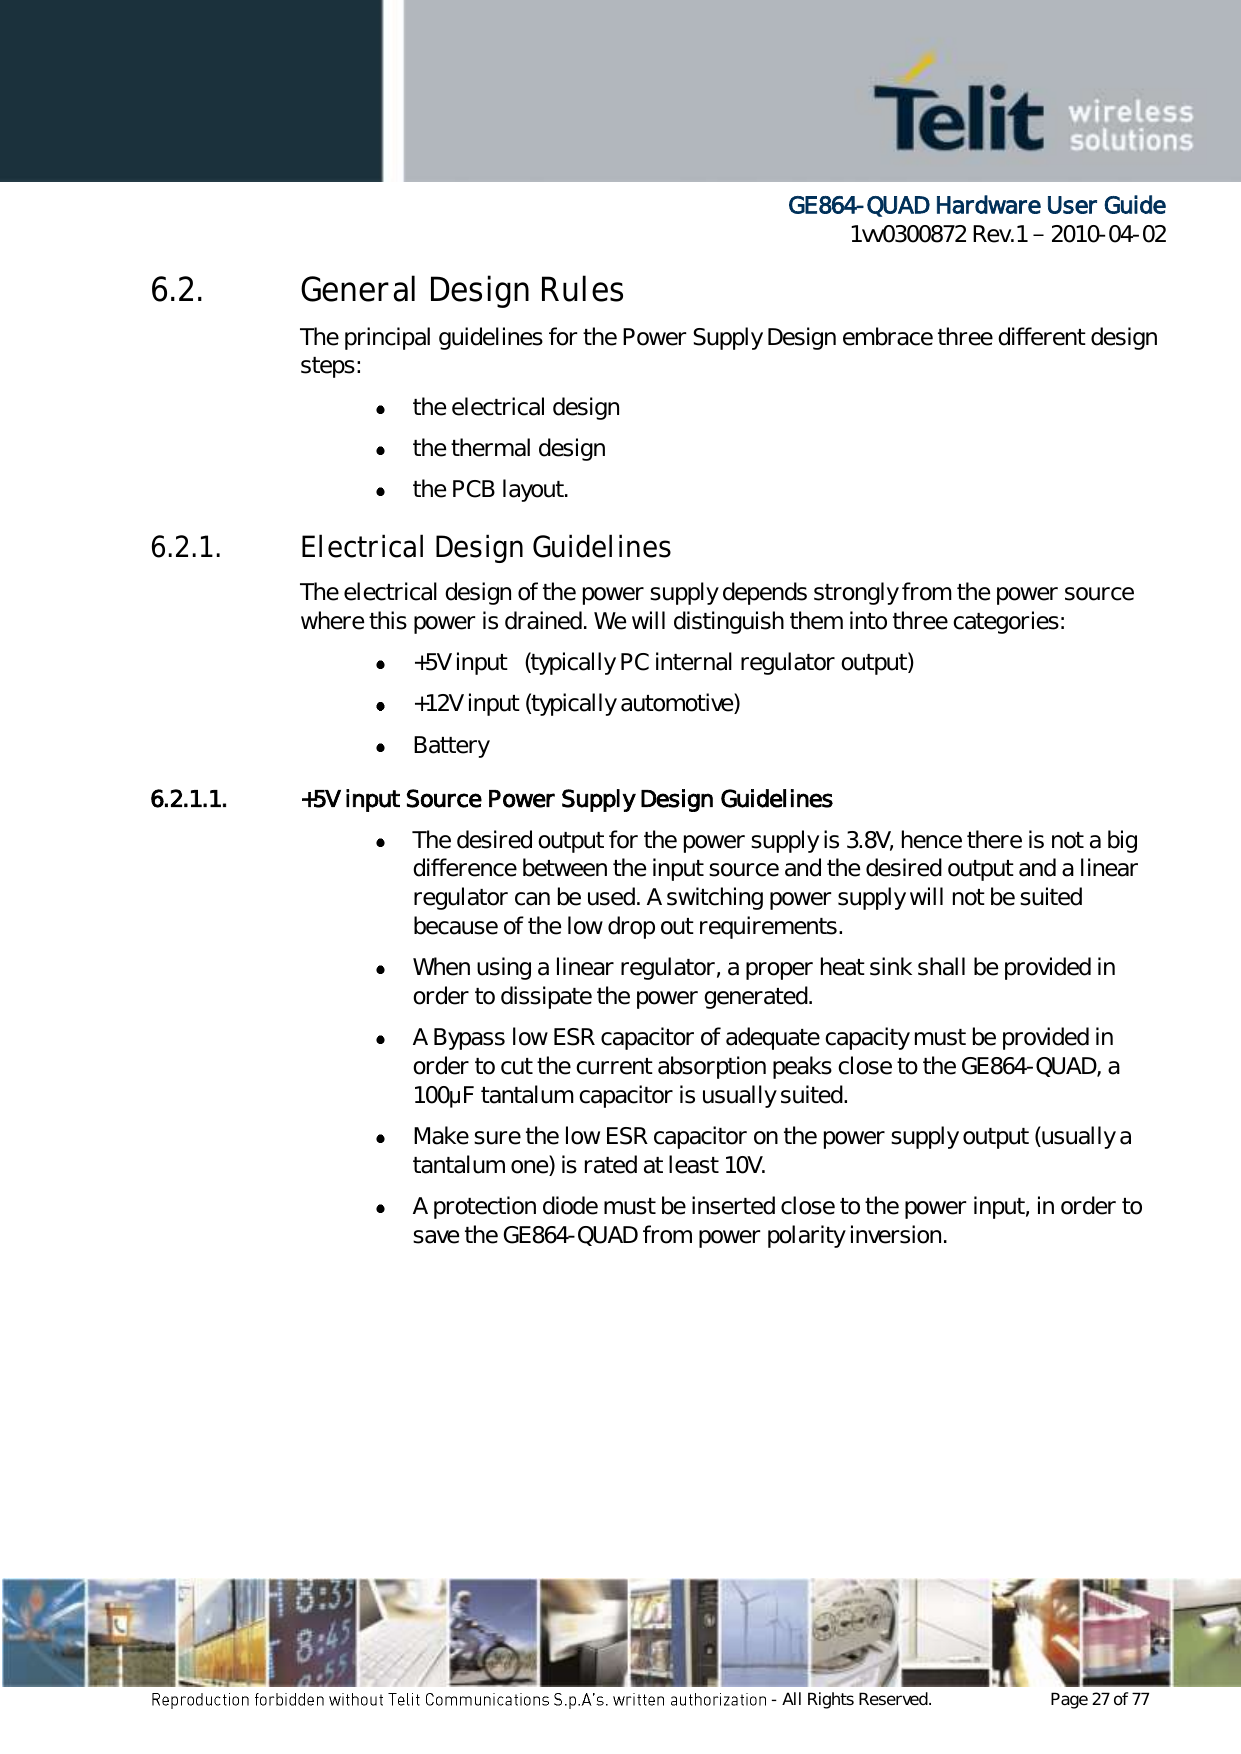      GE864-QUAD Hardware User Guide 1vv0300872 Rev.1   2010-04-02 - All Rights Reserved.    Page 27 of 77  6.2. General Design Rules The principal guidelines for the Power Supply Design embrace three different design steps:  the electrical design  the thermal design  the PCB layout. 6.2.1. Electrical Design Guidelines The electrical design of the power supply depends strongly from the power source where this power is drained. We will distinguish them into three categories:  +5V input   (typically PC internal regulator output)  +12V input (typically automotive)  Battery 6.2.1.1. +5V input Source Power Supply Design Guidelines  The desired output for the power supply is 3.8V, hence there is not a big difference between the input source and the desired output and a linear regulator can be used. A switching power supply will not be suited because of the low drop out requirements.  When using a linear regulator, a proper heat sink shall be provided in order to dissipate the power generated.  A Bypass low ESR capacitor of adequate capacity must be provided in order to cut the current absorption peaks close to the GE864-QUAD, a 100μF tantalum capacitor is usually suited.  Make sure the low ESR capacitor on the power supply output (usually a tantalum one) is rated at least 10V.  A protection diode must be inserted close to the power input, in order to save the GE864-QUAD from power polarity inversion. 